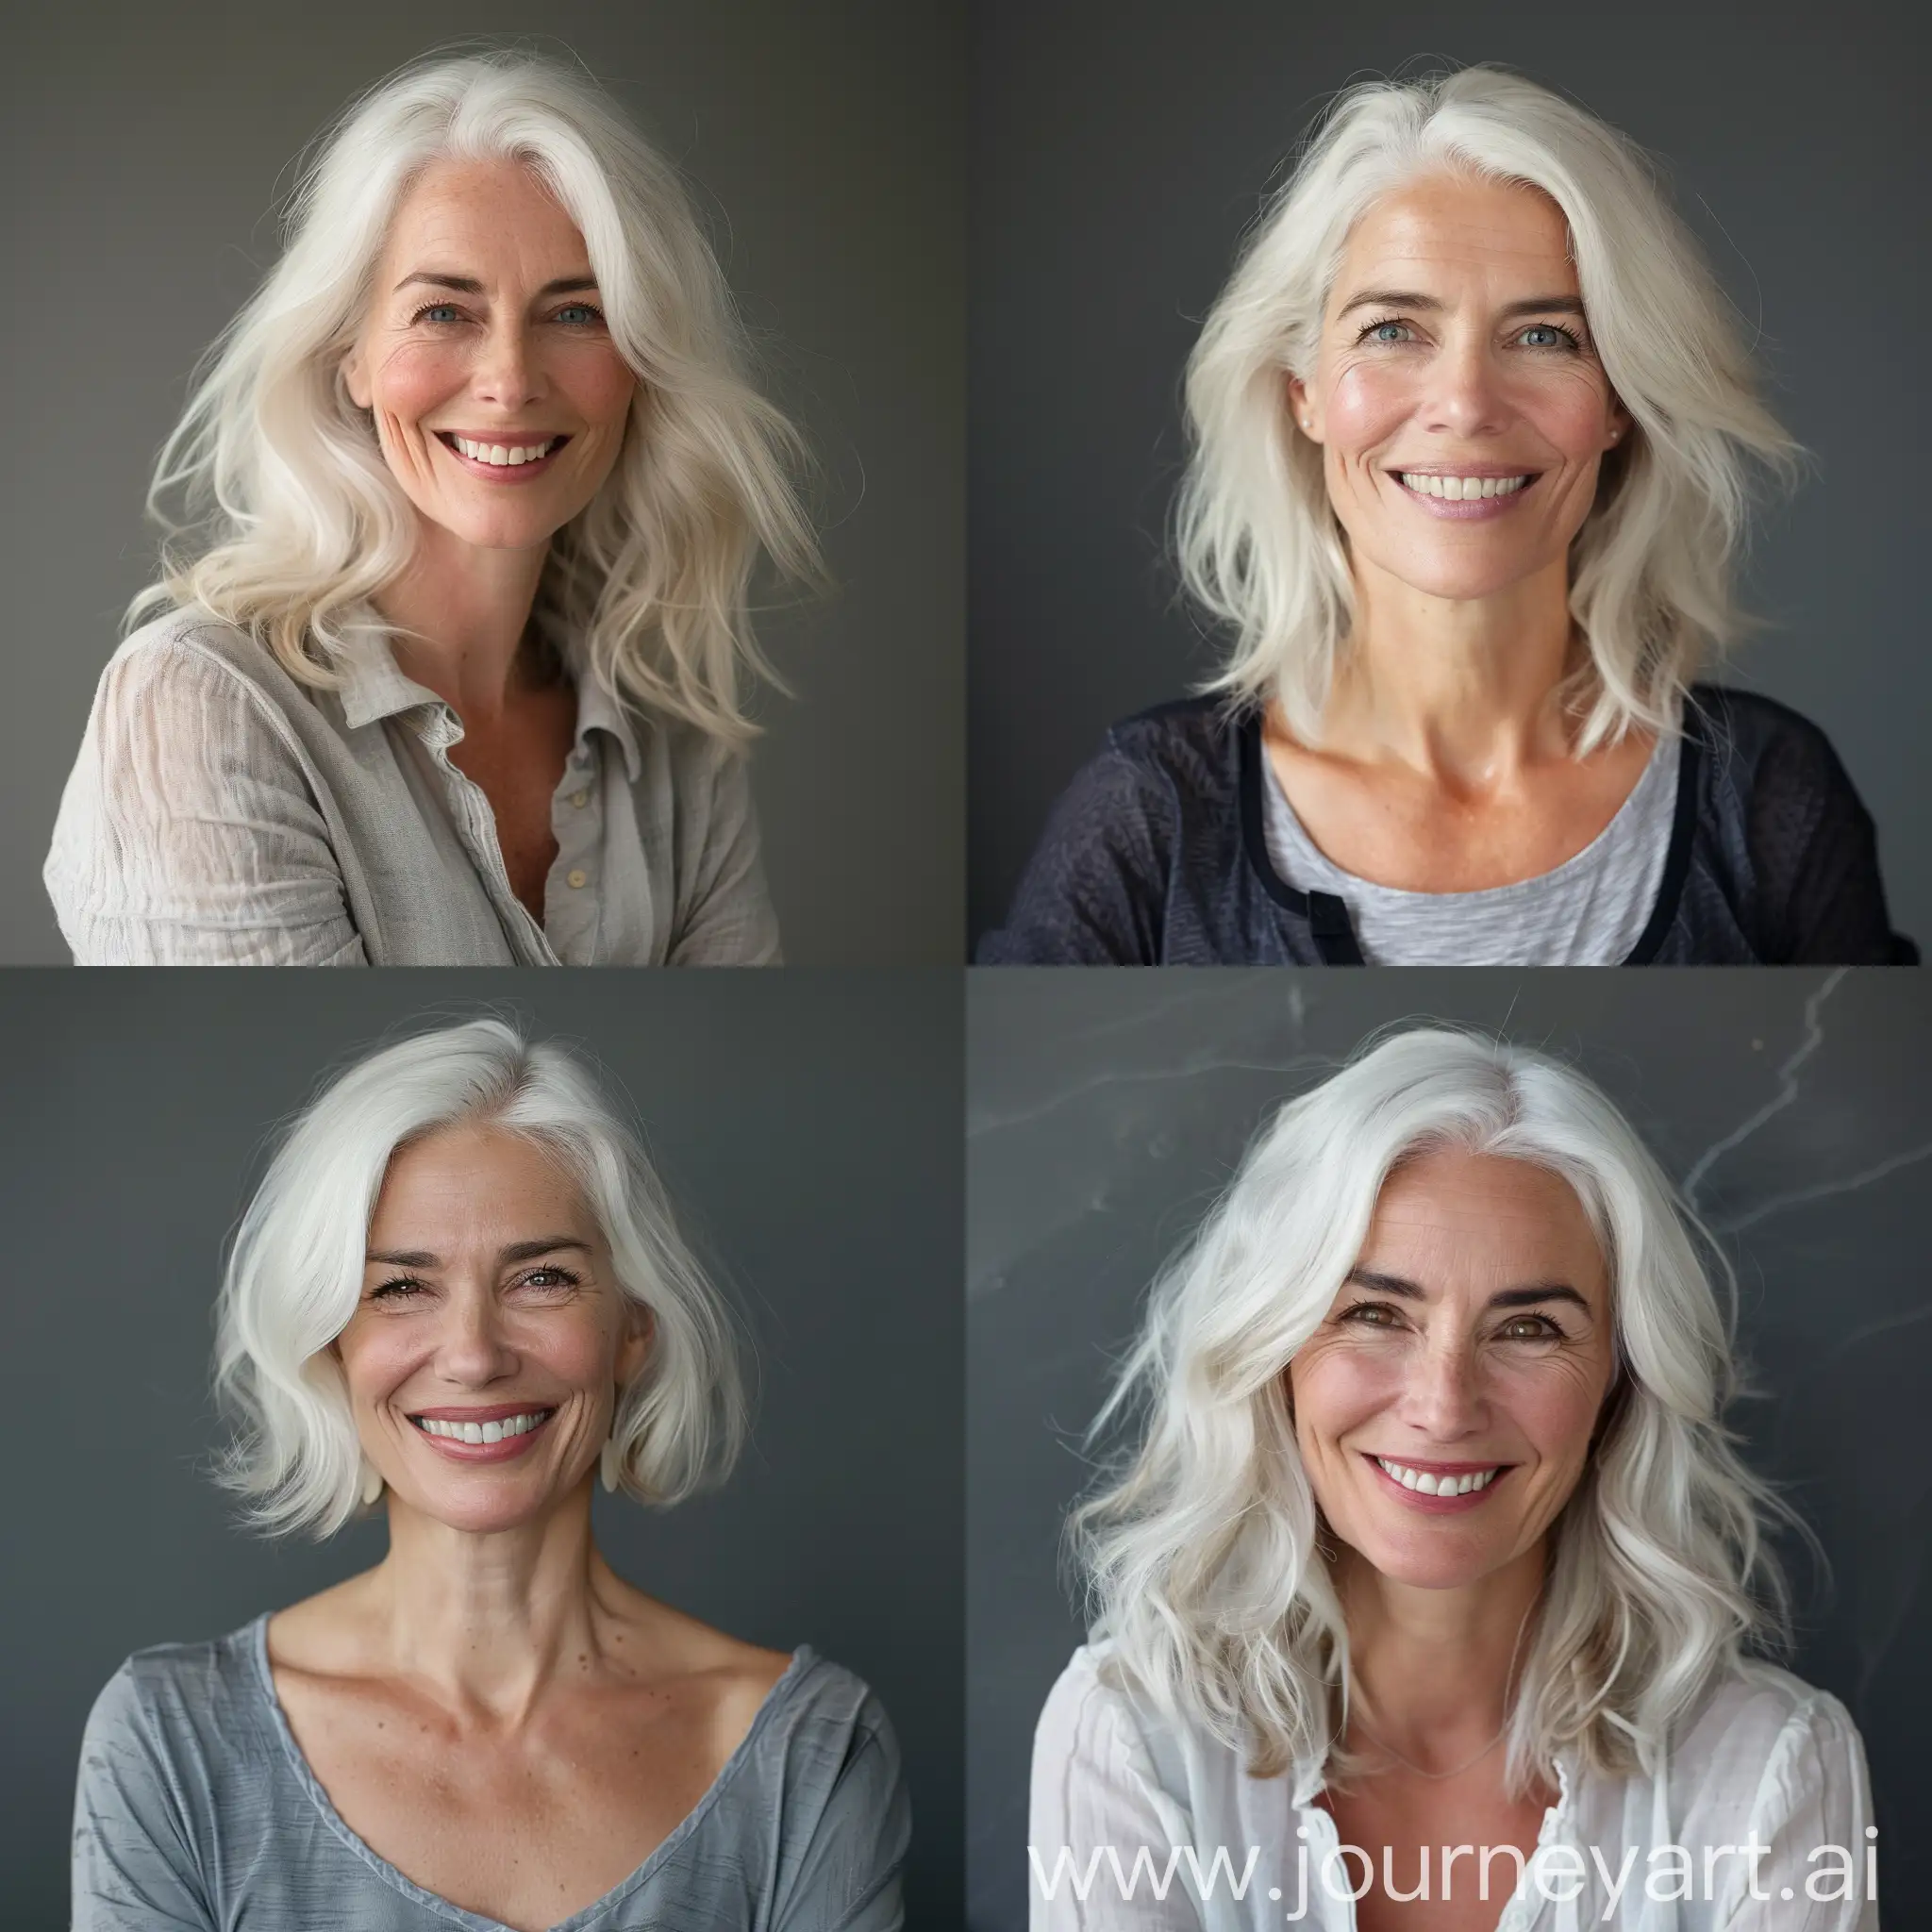 white haired smiling woman; 40 years old, realistic, grey background